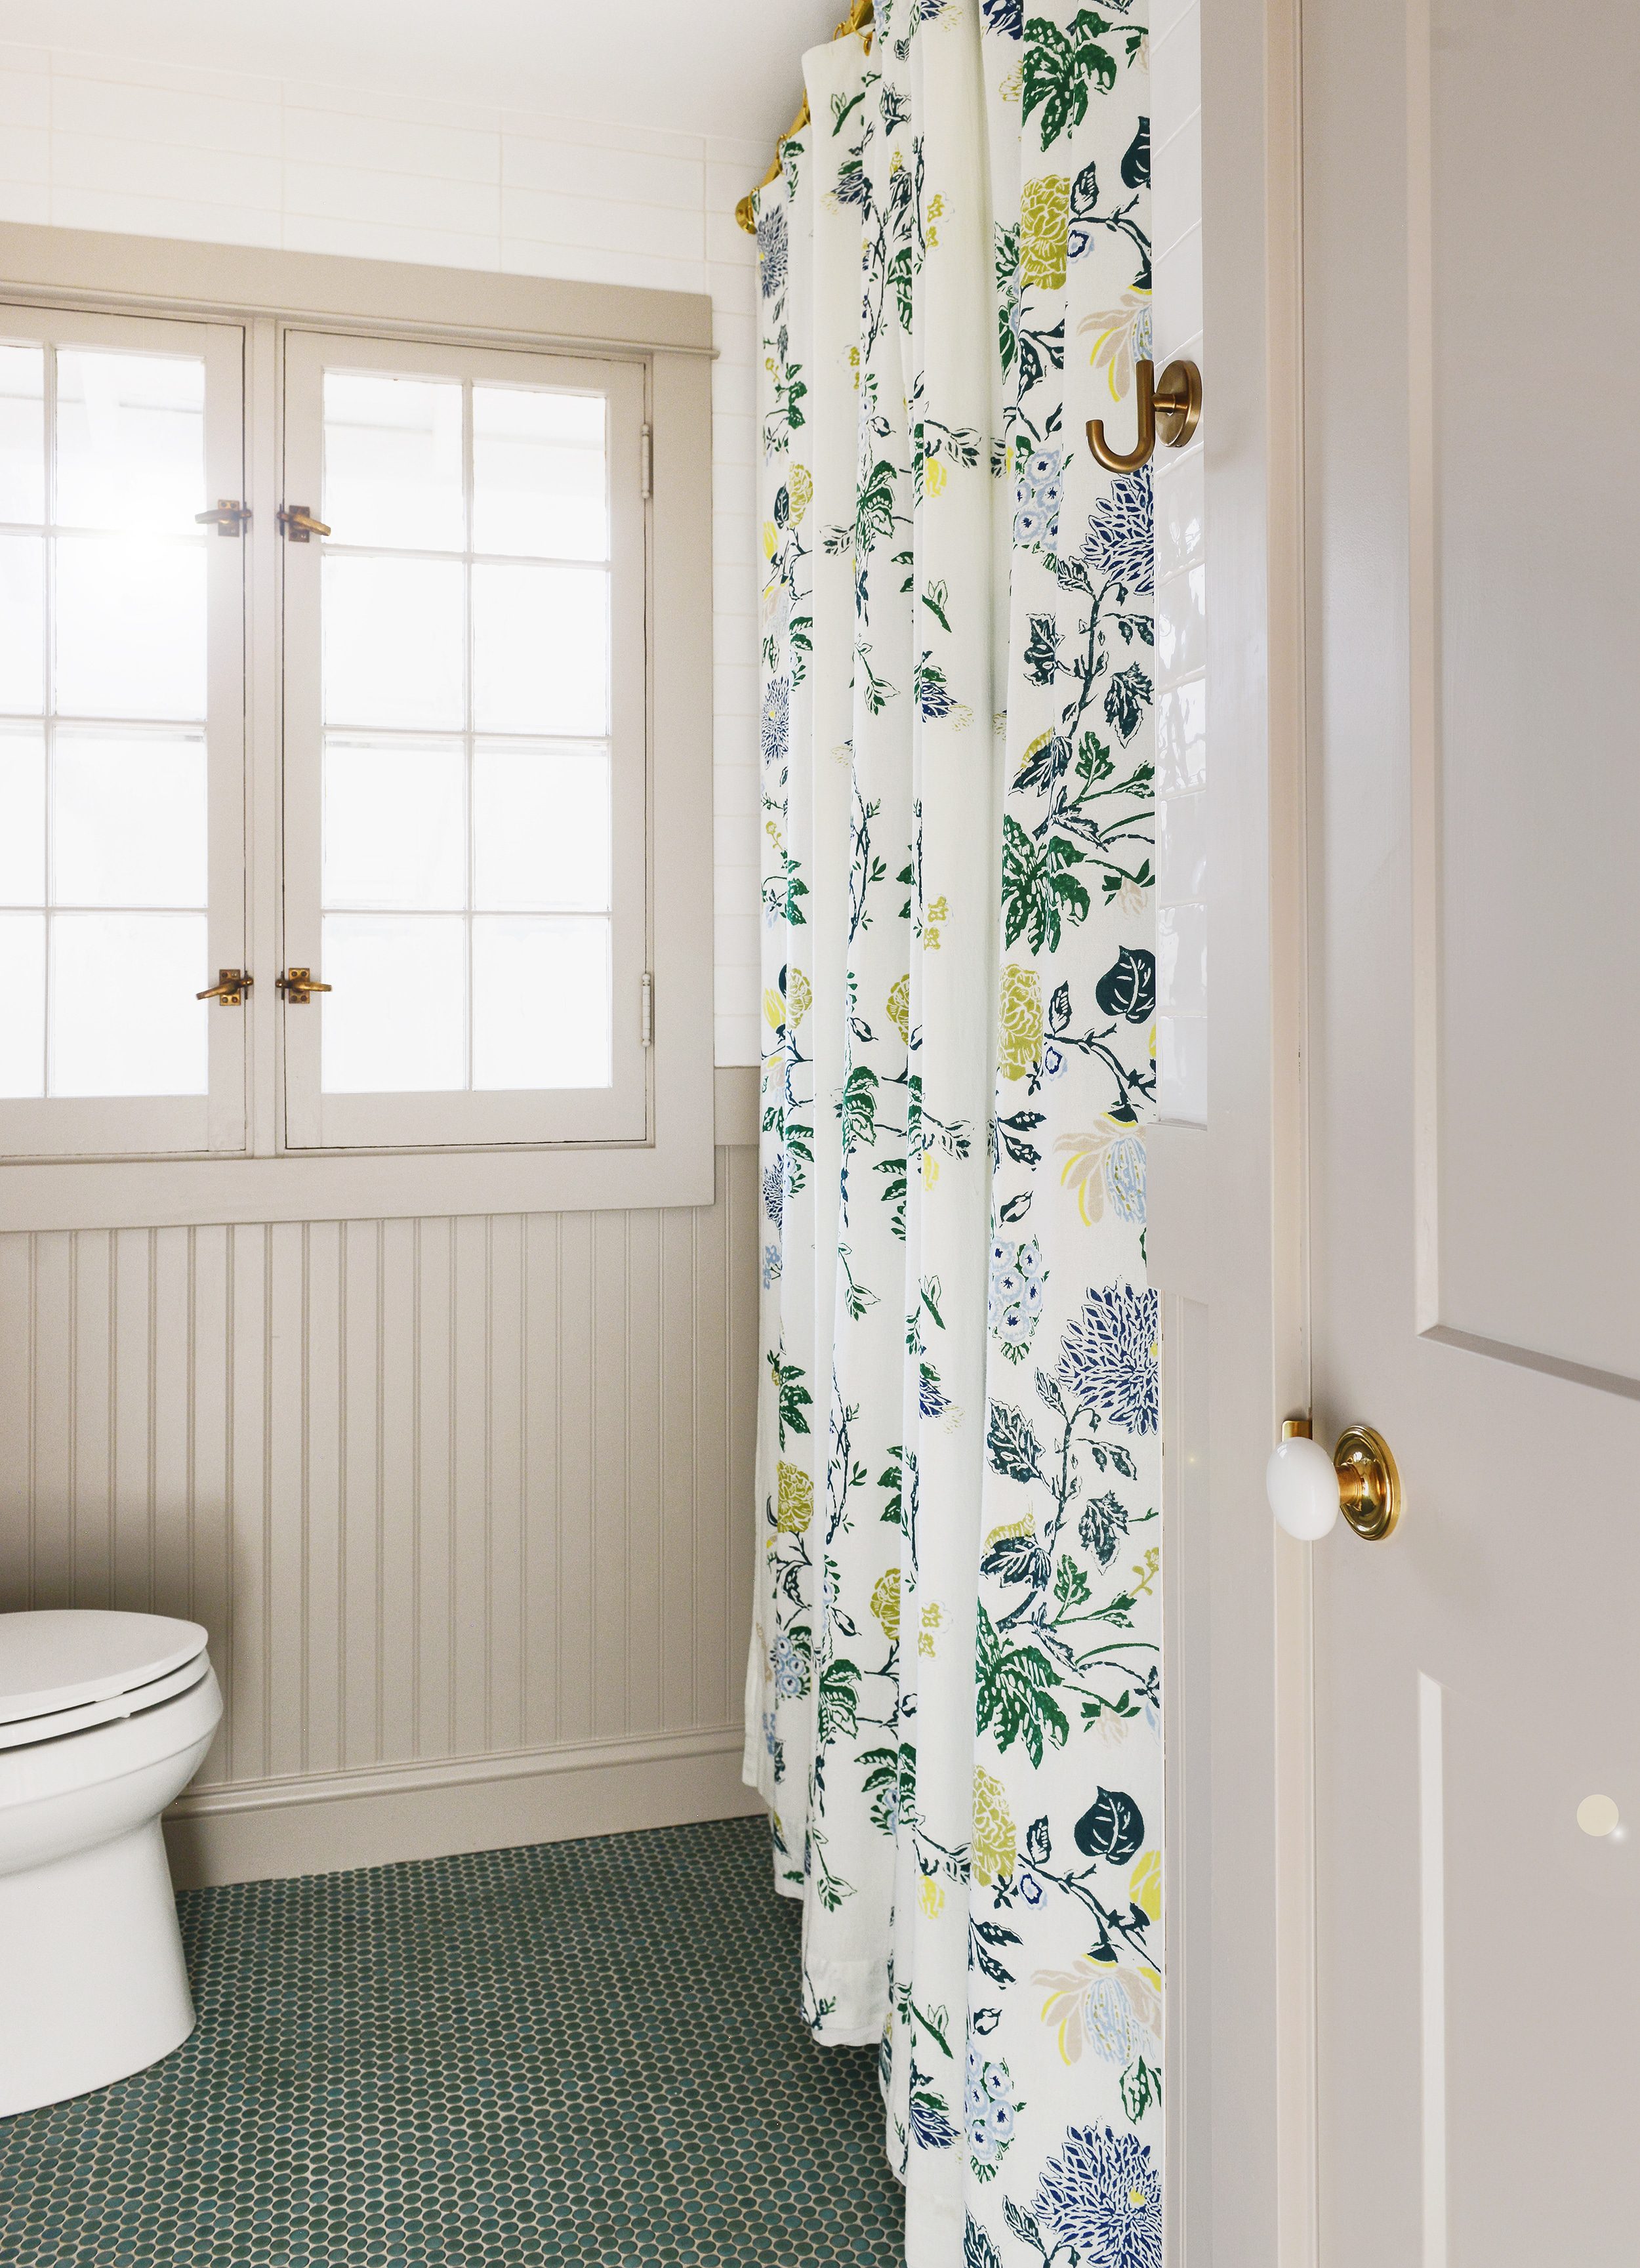 An extra long shower curtain using window panels sewn together | via Yellow Brick Home